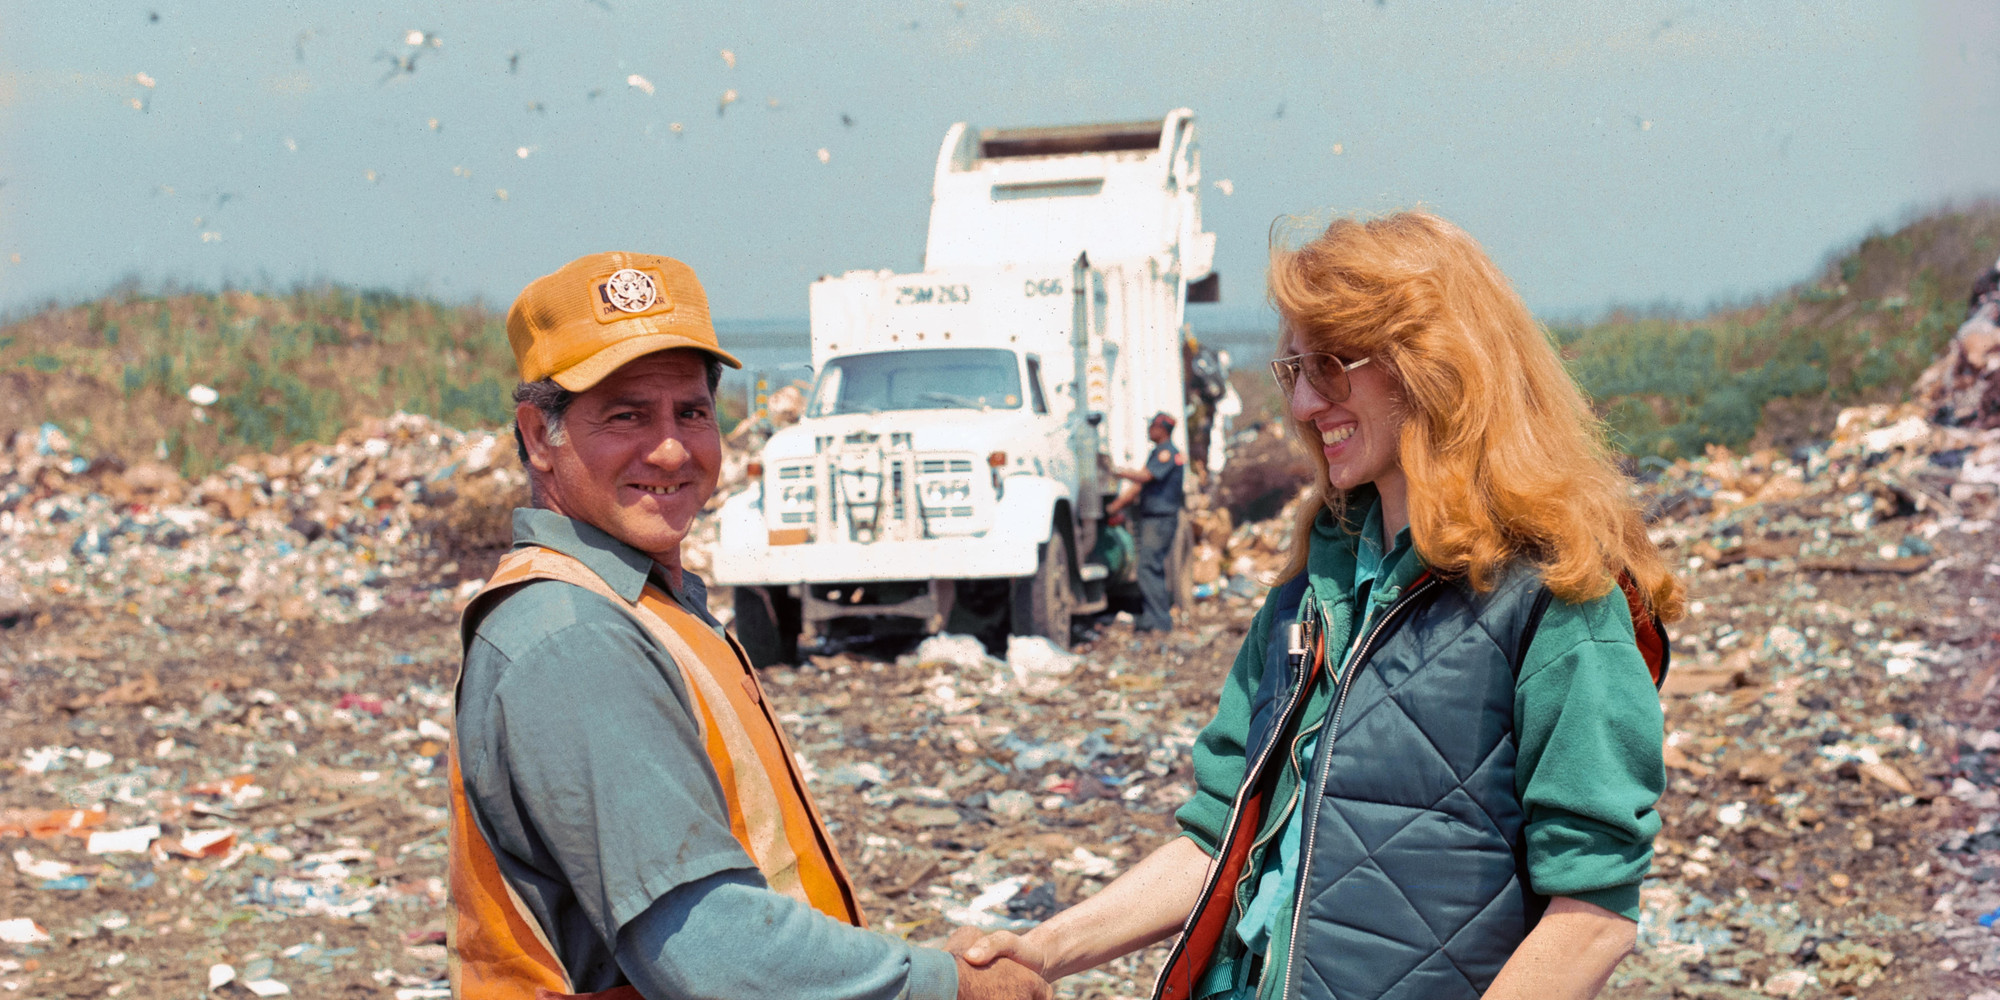 Mierle Laderman Ukeles. Touch Sanitation. July 24, 1979–June 26, 1980. Citywide performance with 8,500 Sanitation workers across all 59 New York City Sanitation districts. Image from May 15, 1980, Sweep 10, Queens District 14. Photo: Vincent Russo. © Mierle Laderman Ukeles. Courtesy the artist and Ronald Feldman Gallery, New York